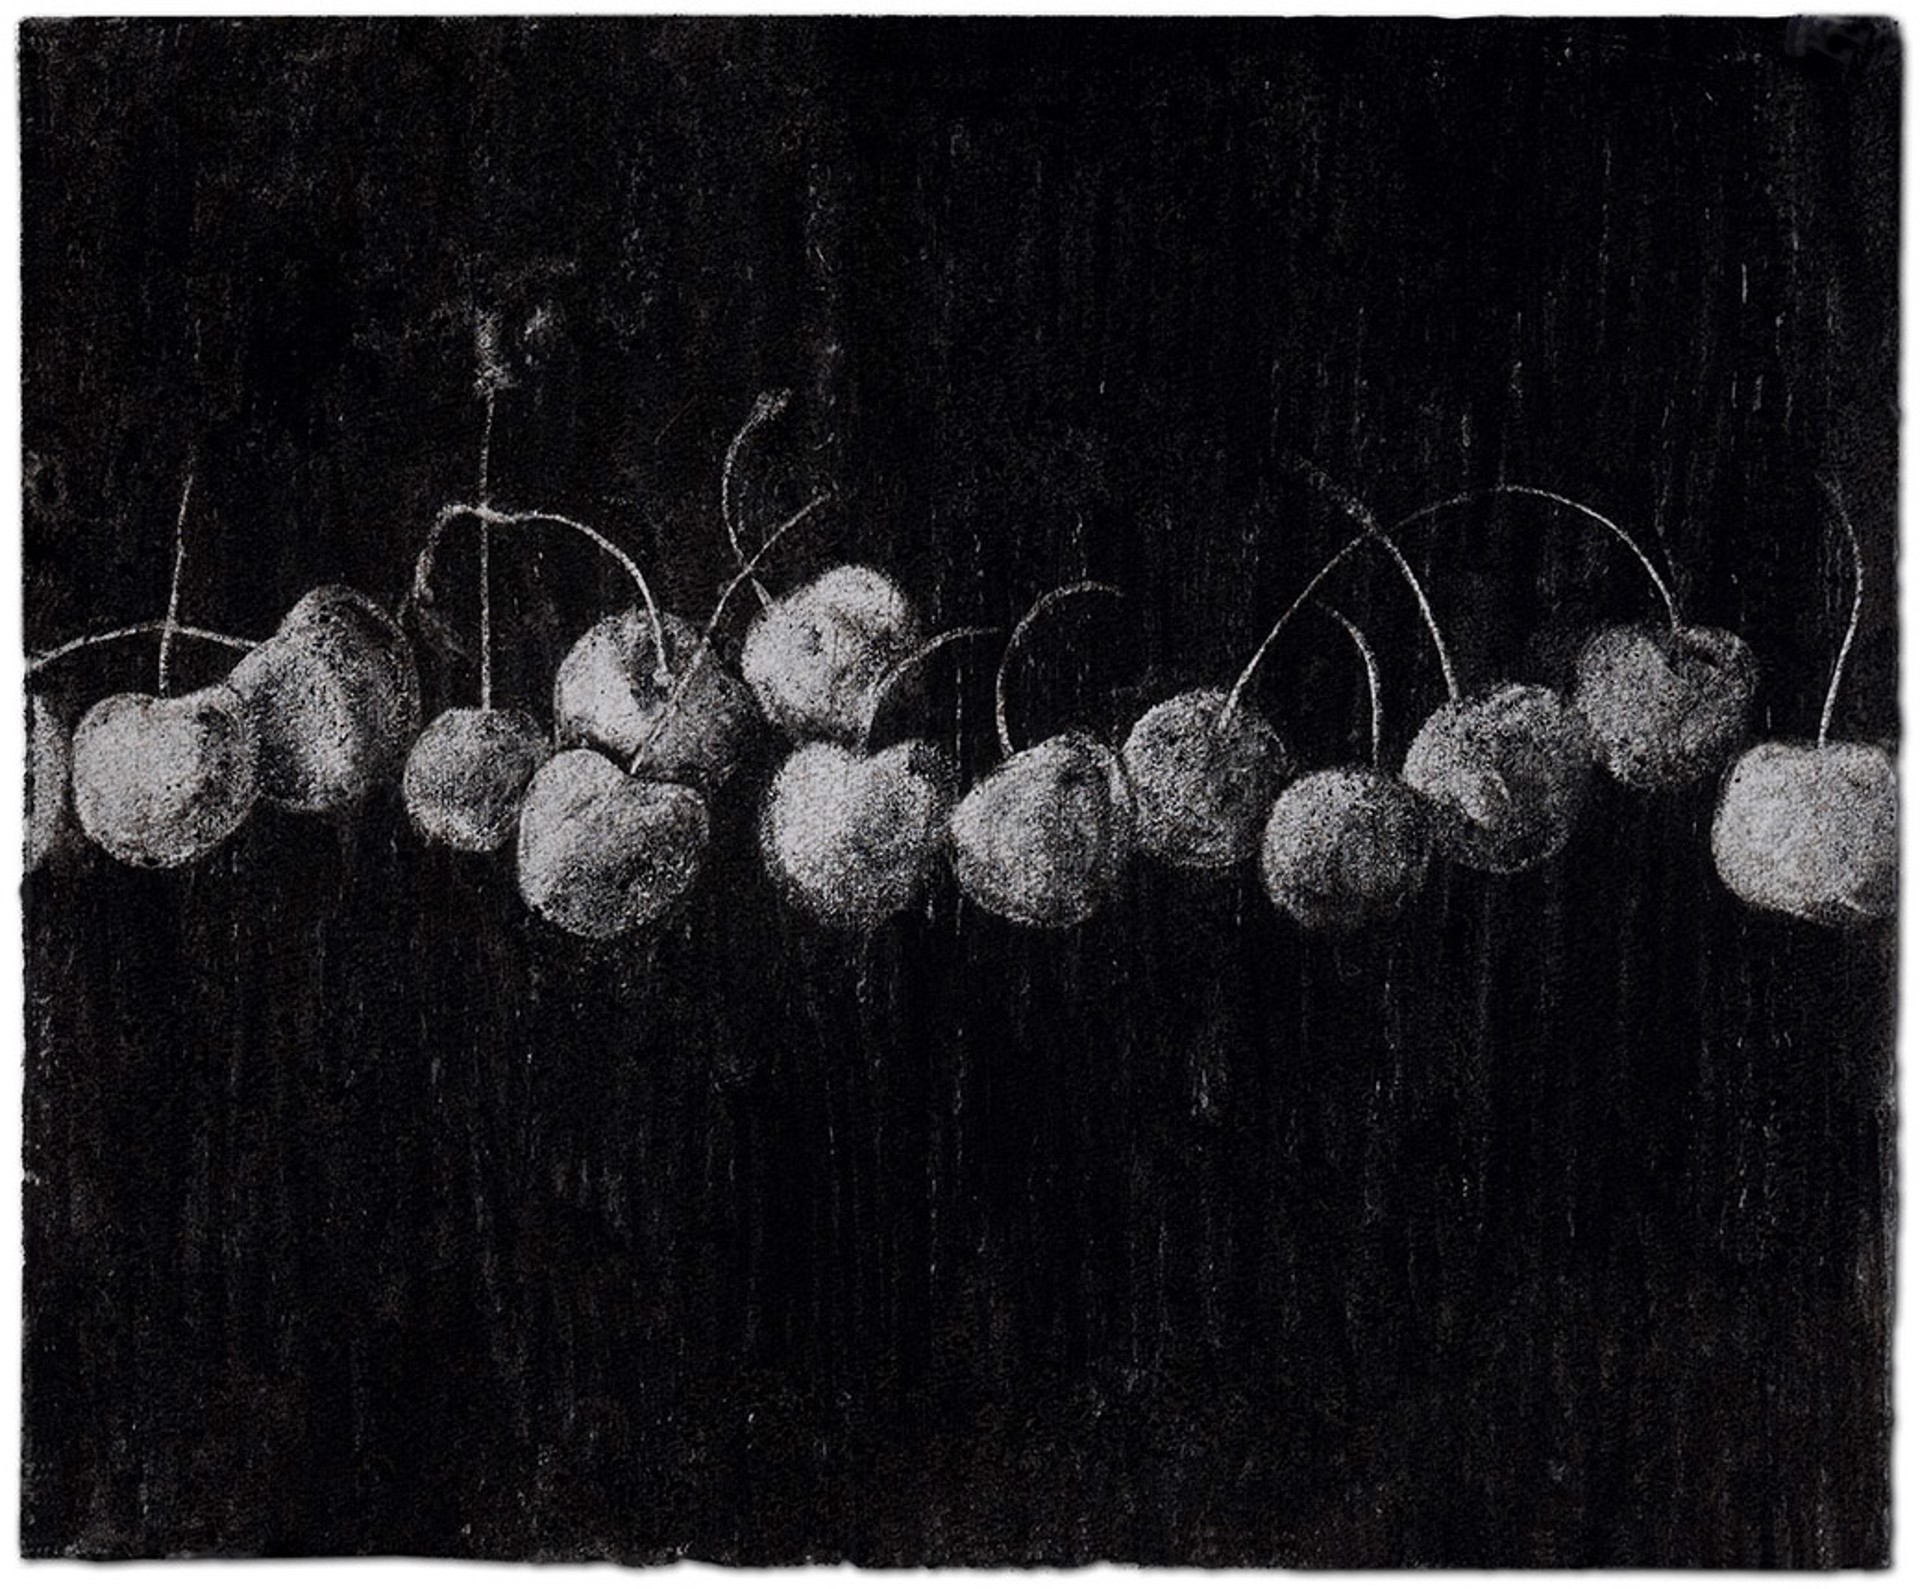 Untitled, Black Drawing #14 by Kathy Moss